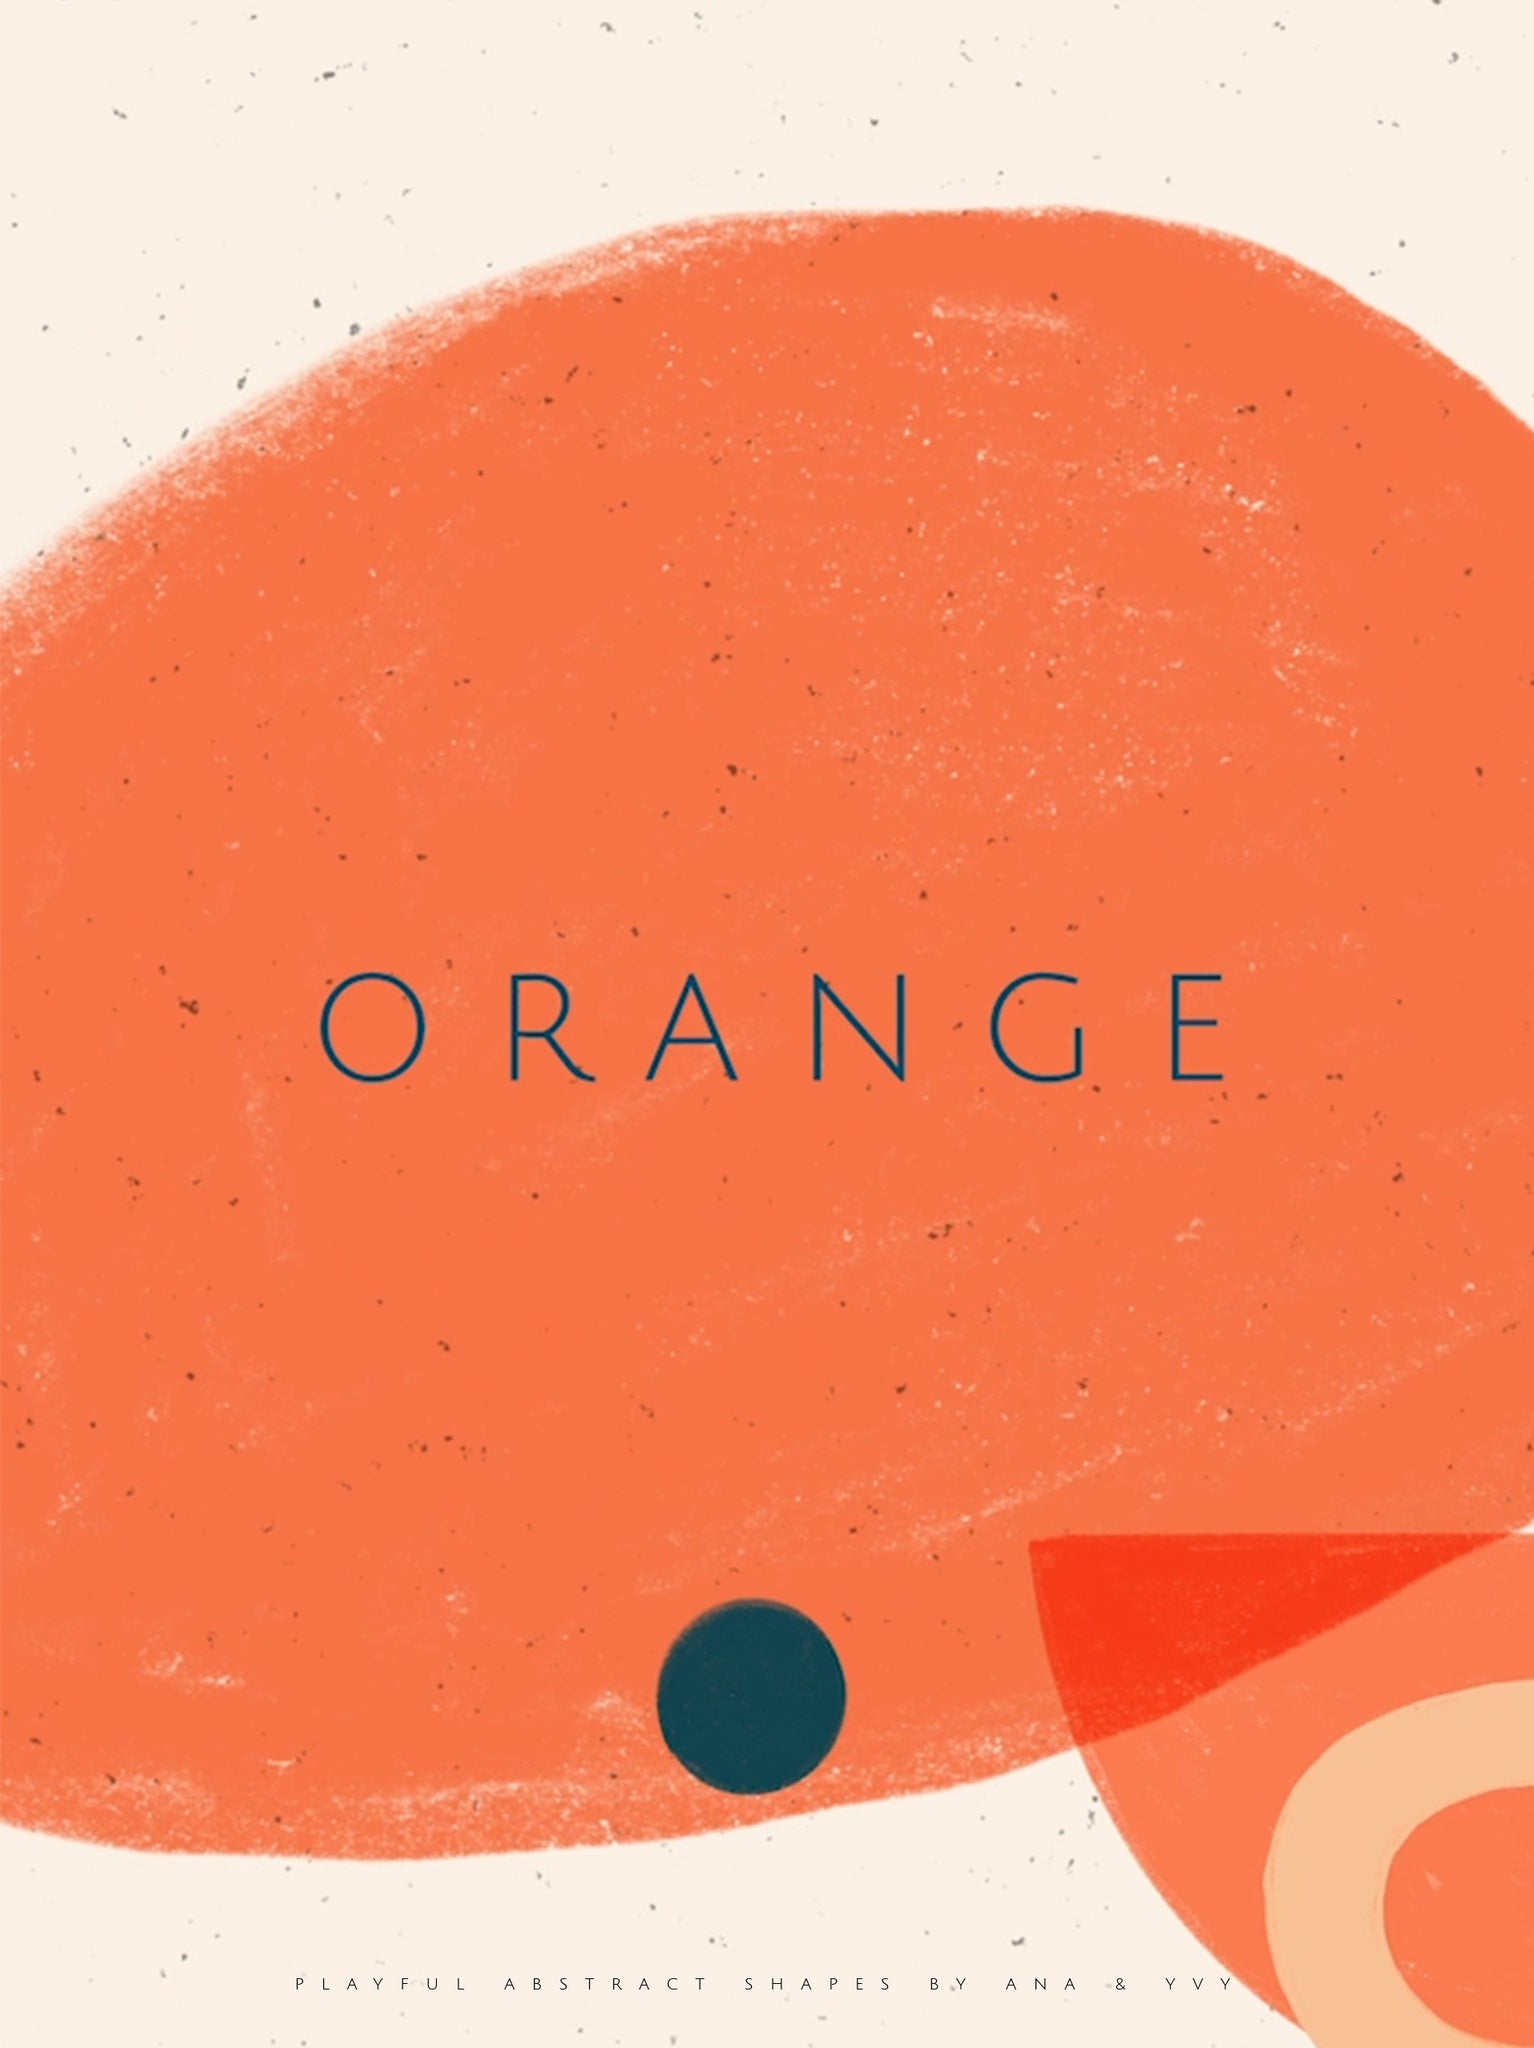 Abstract Shapes | The Burned Orange - ANA & YVY